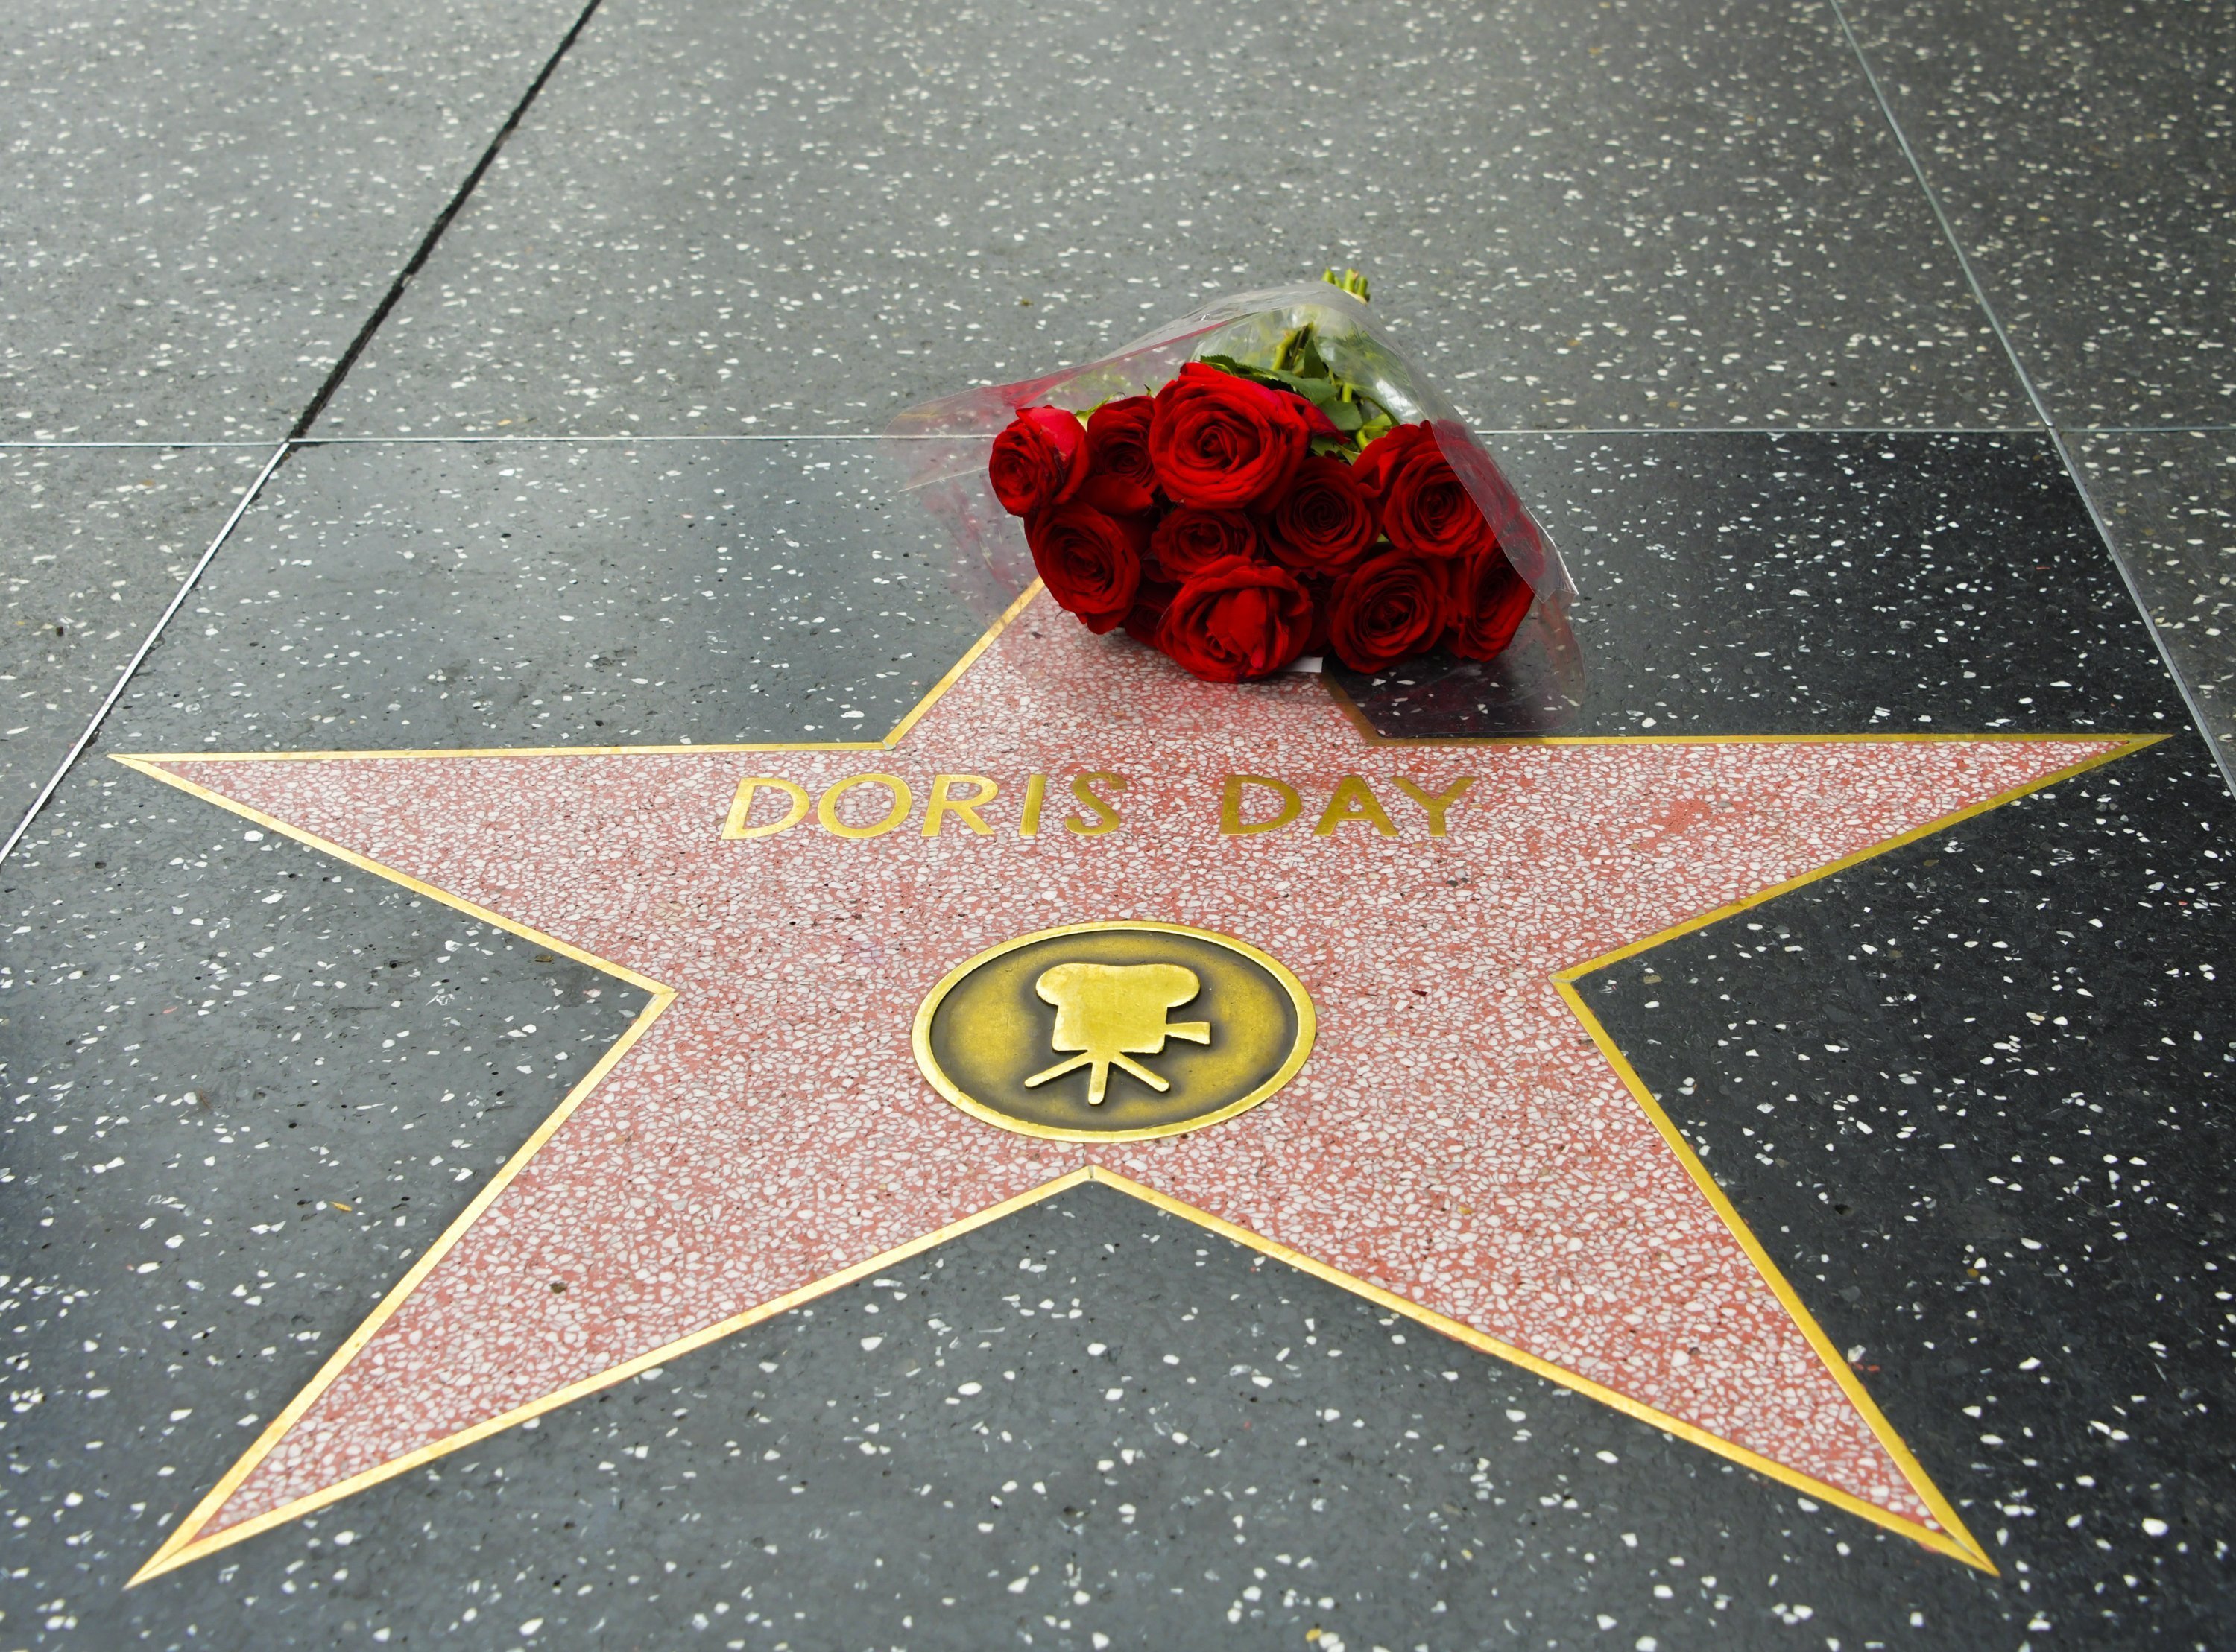 Flowers placed on Doris Day's Star on the Hollywood Walk of Fame following the news of her death | Photo: Getty Images